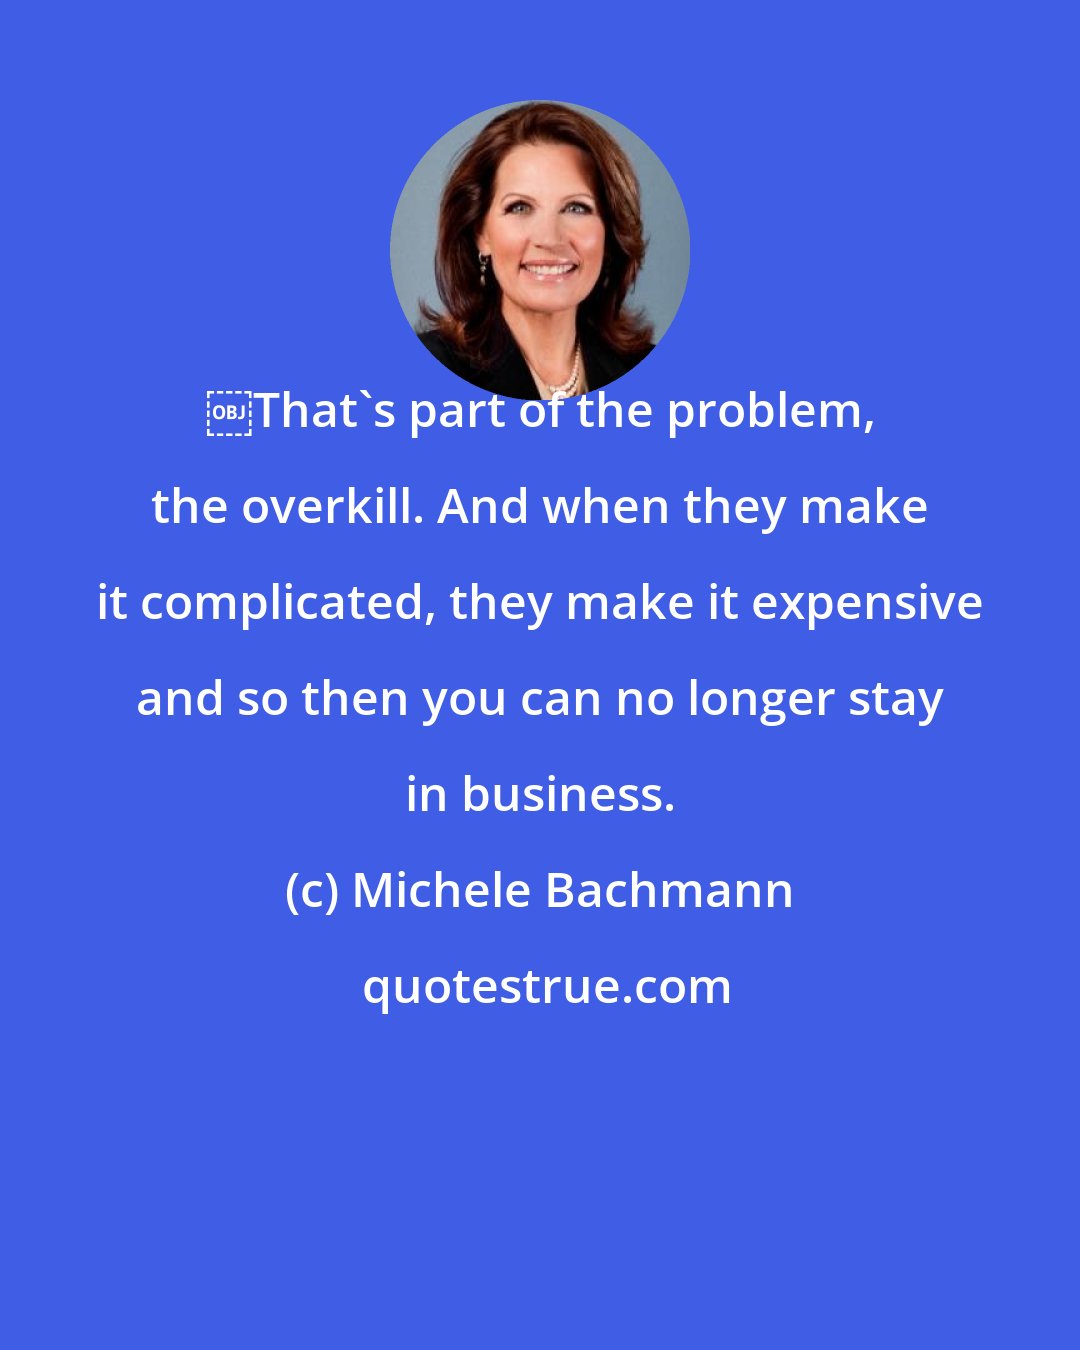 Michele Bachmann: ￼That's part of the problem, the overkill. And when they make it complicated, they make it expensive and so then you can no longer stay in business.